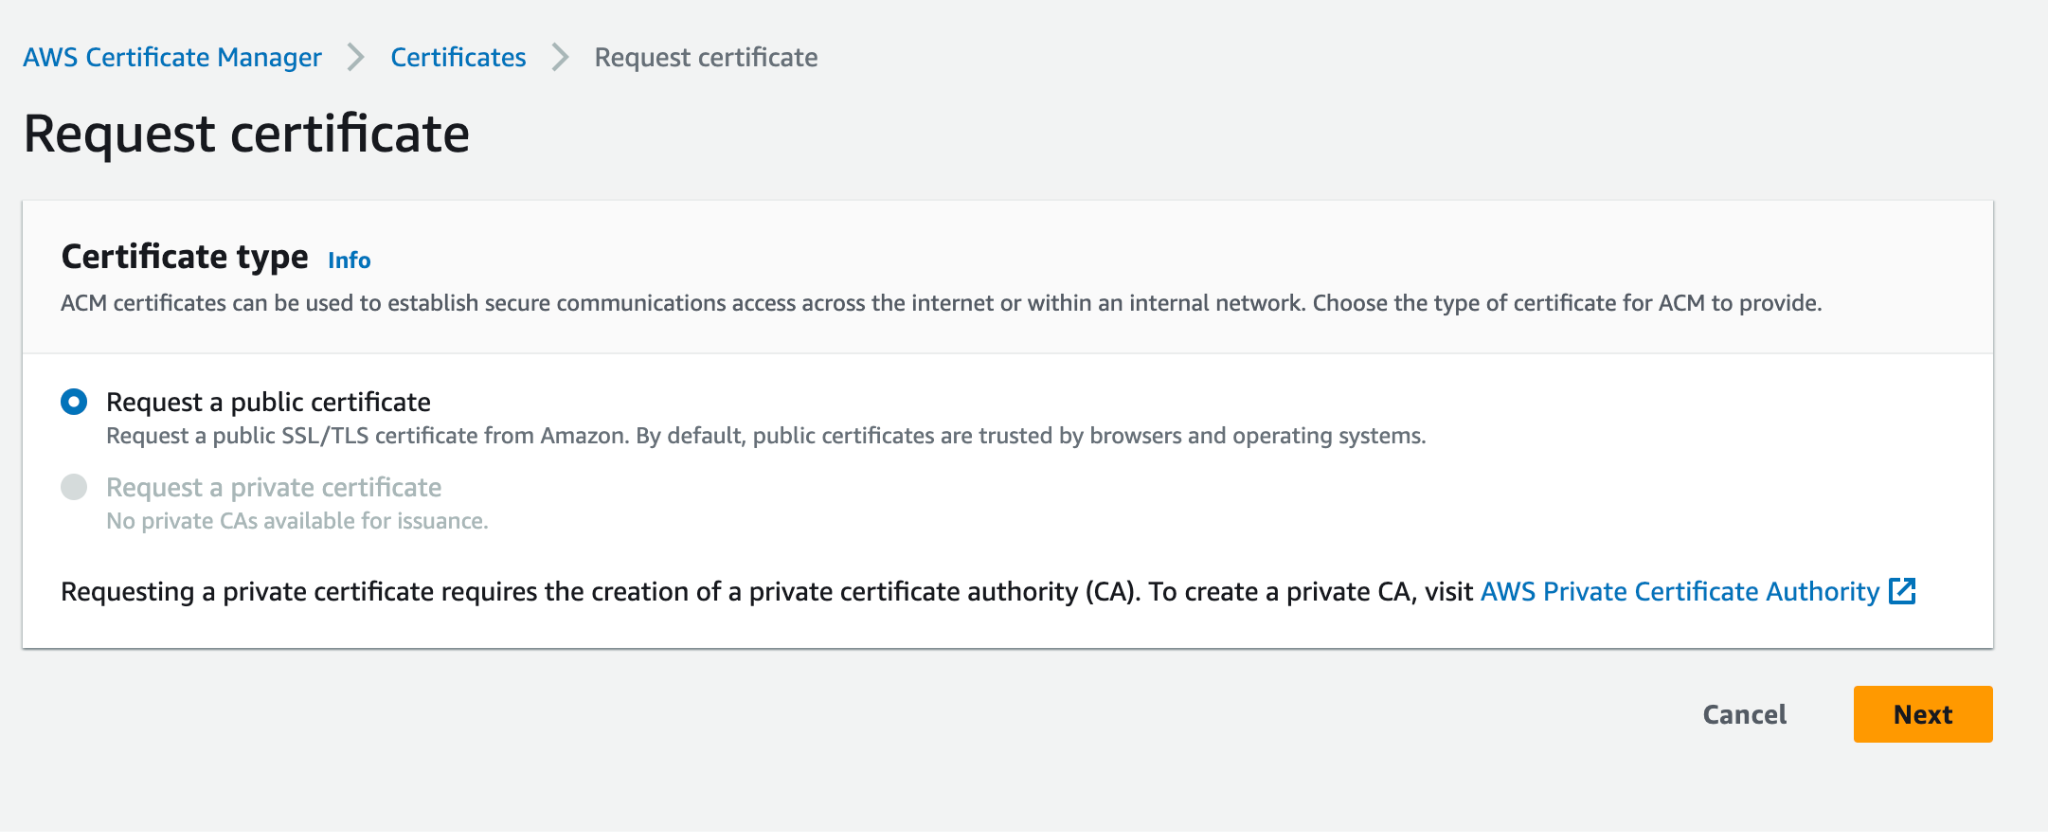 AWS Certificate Manager interface: Search, request a public SSL/TLS certificate for secure communication.